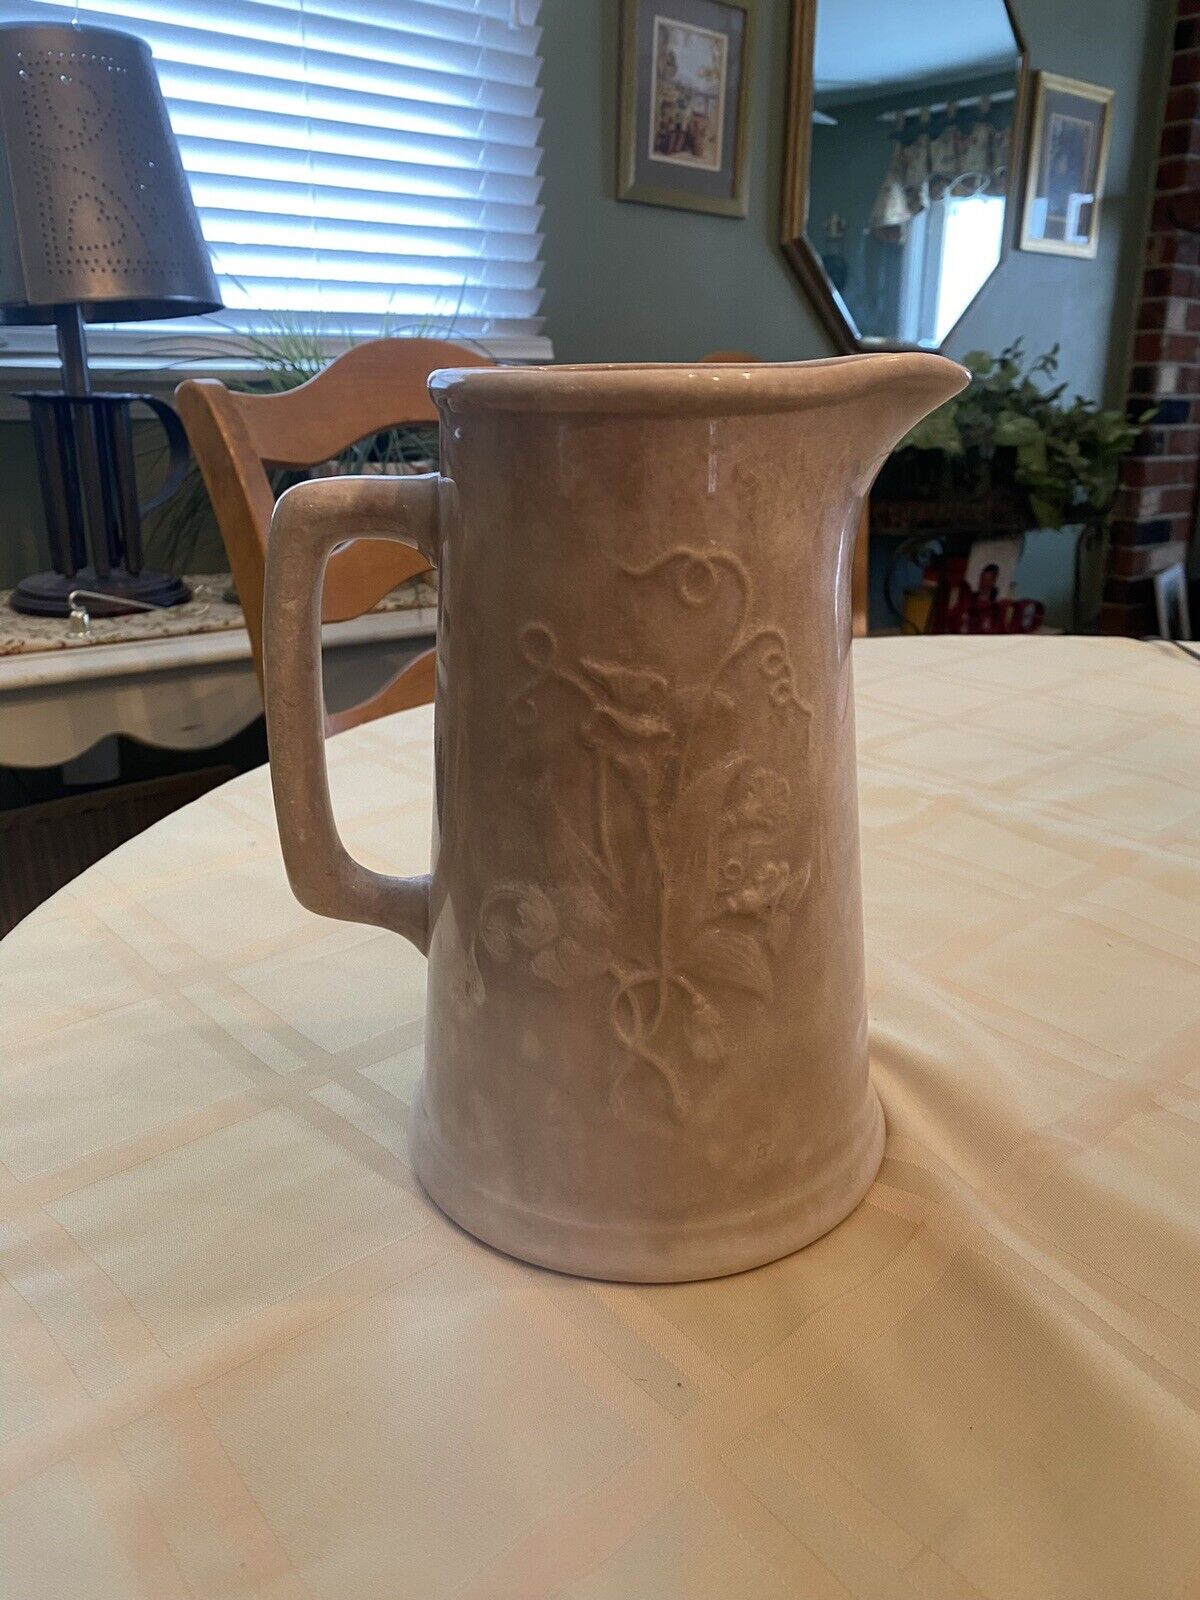 Antique White Ironstone Pitcher Stained Crazed Patina Farmhouse